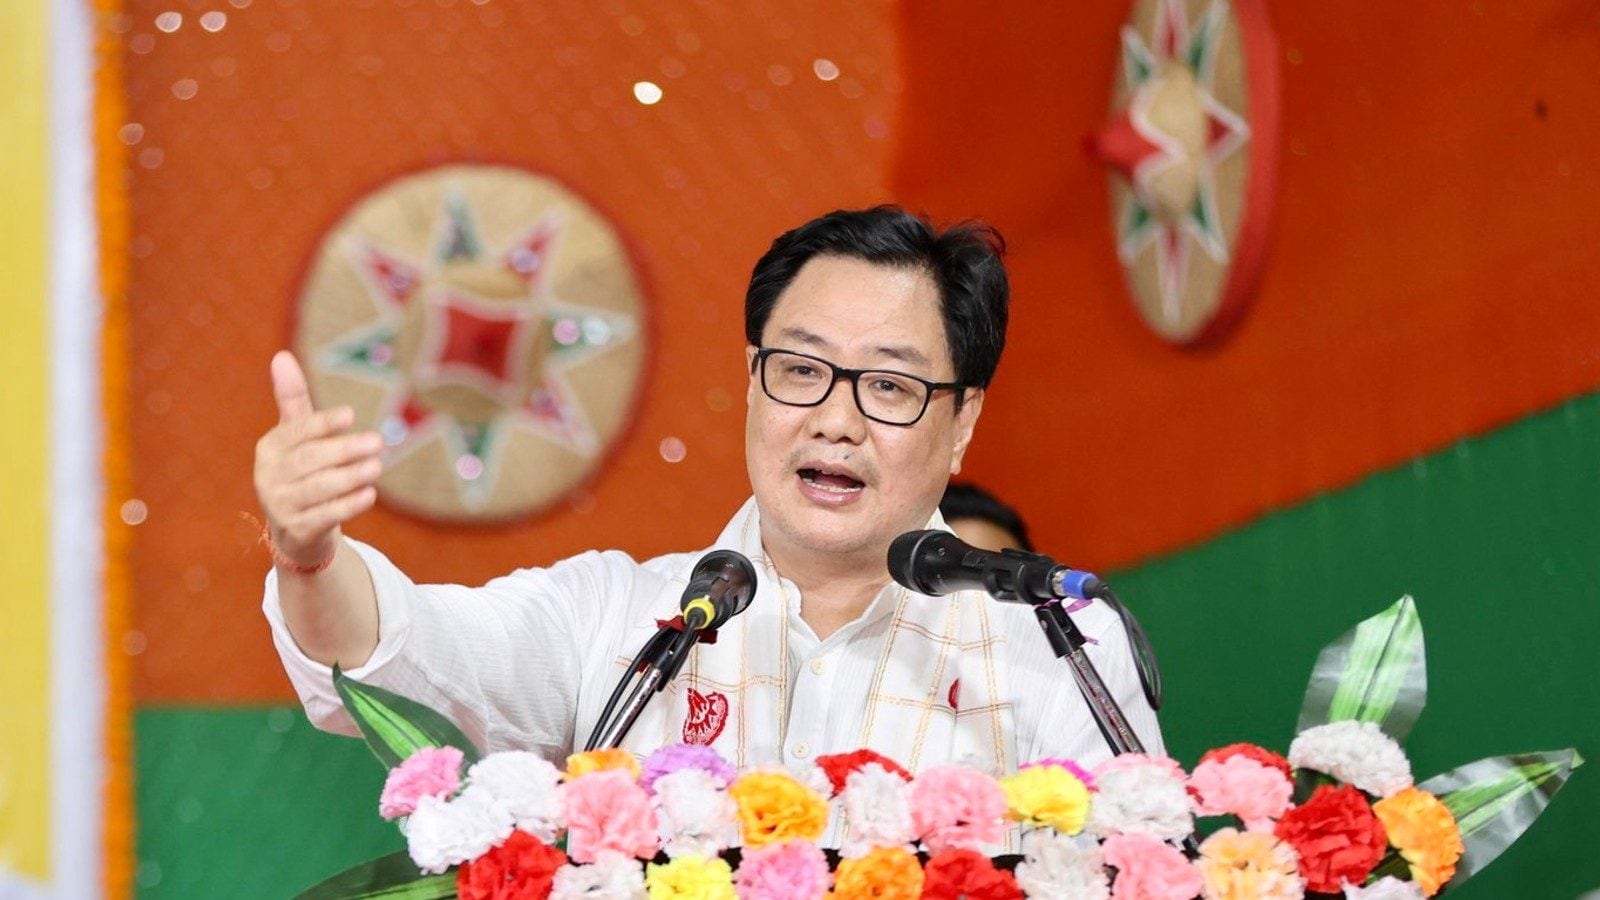 430 of 554 HC Judges Appointed Since 2018 Belong to General Category: Rijiju